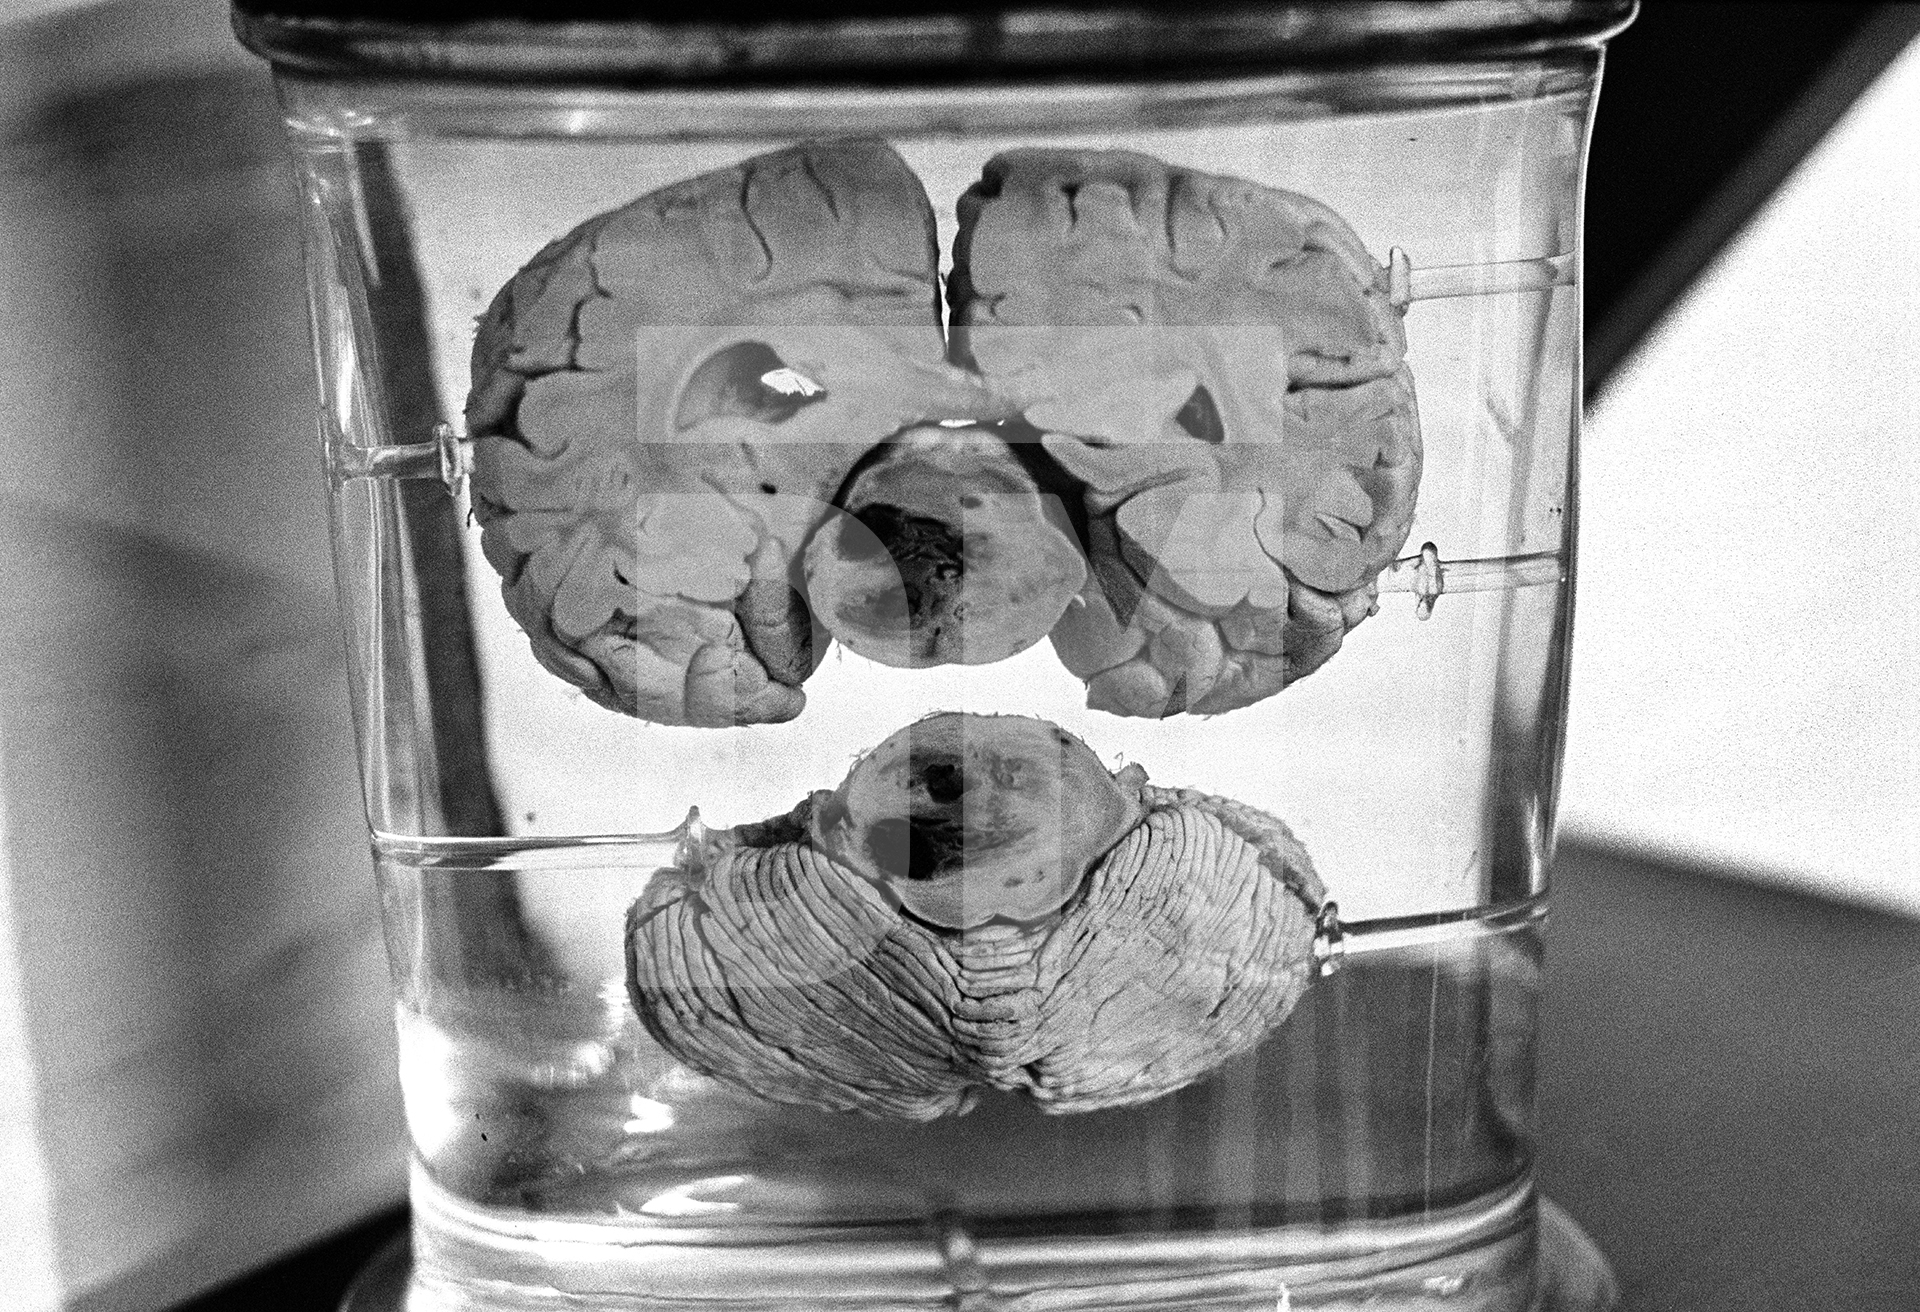 The hospital keeps a small museum of objects to assist in staff training, including quite an array of brains in bottles. February 1978 by Daniel Meadows